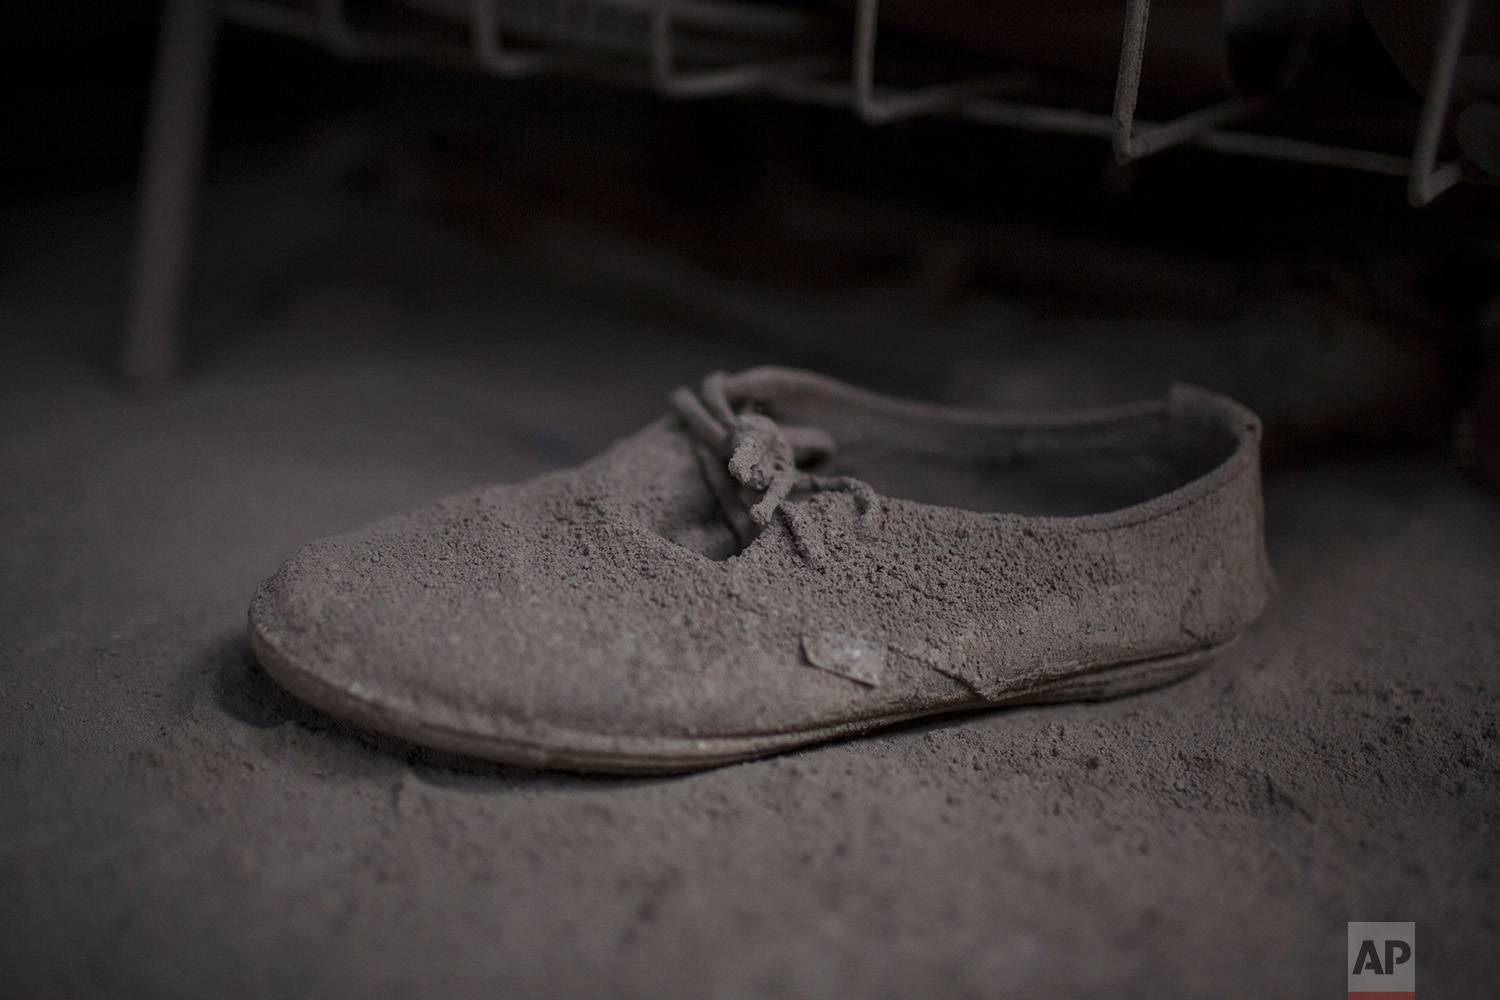  This June 9, 2018 photo shows a shoe caked with volcanic ash spewed by the Volcan de Fuego or Volcano of Fire, inside a home in San Miguel Los Lotes, Guatemala. (AP Photo/Rodrigo Abd) 